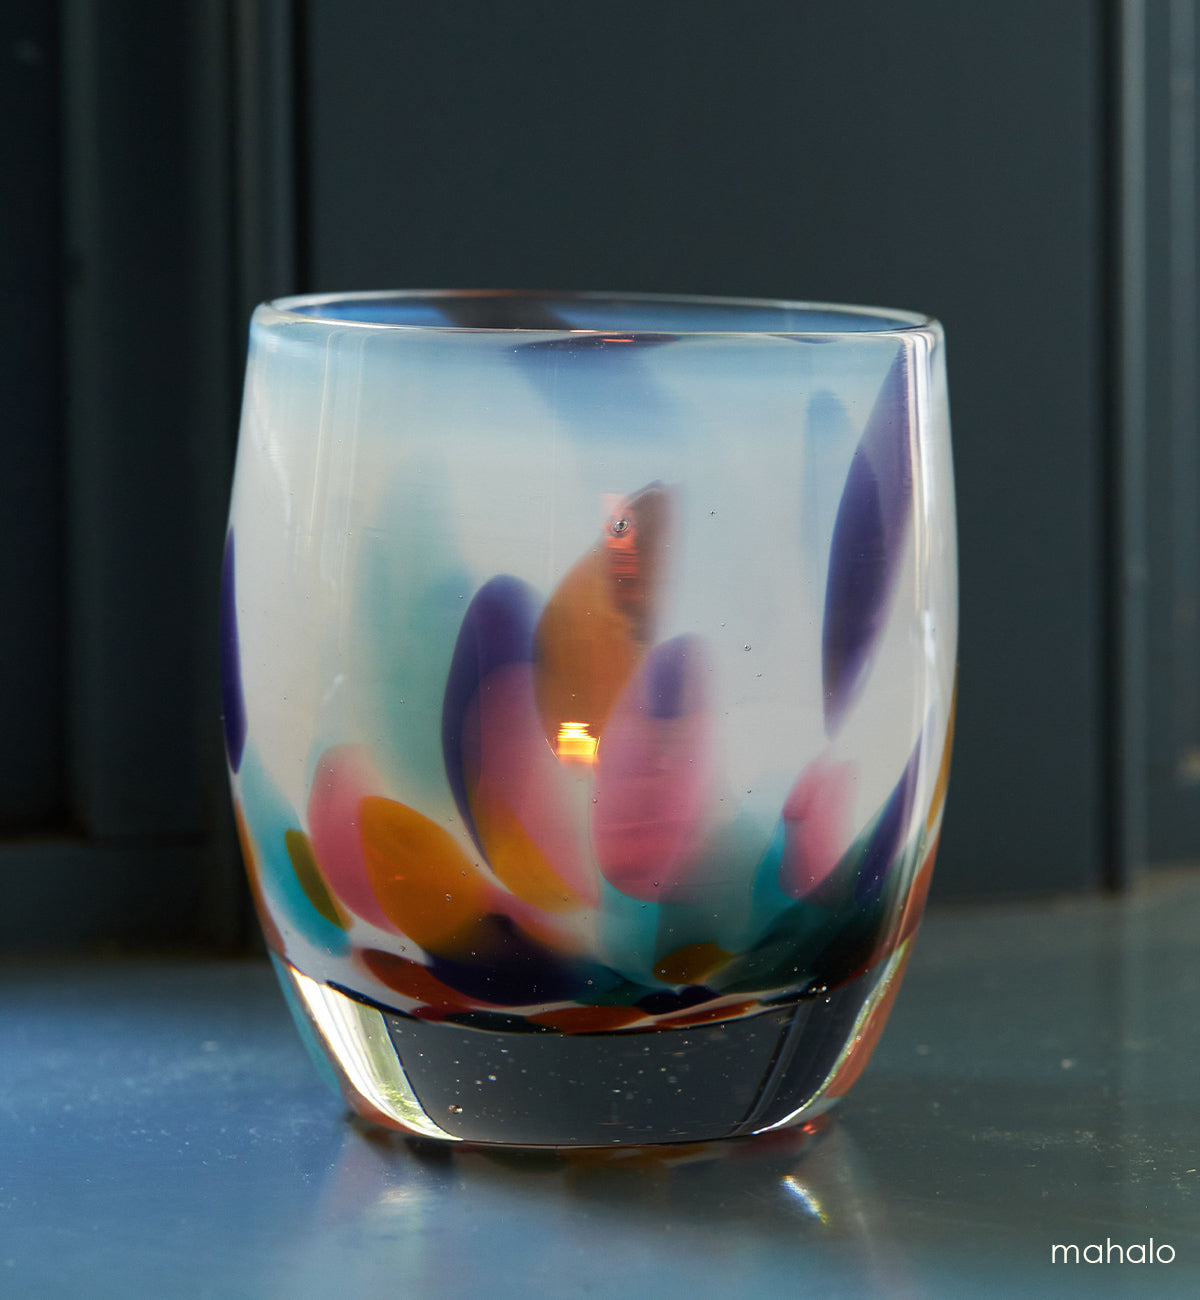 mahalo, white with multi-colored yellow, pink, teal, purple and green petals hand-blown glass votive candle holder on a blue grey surface.